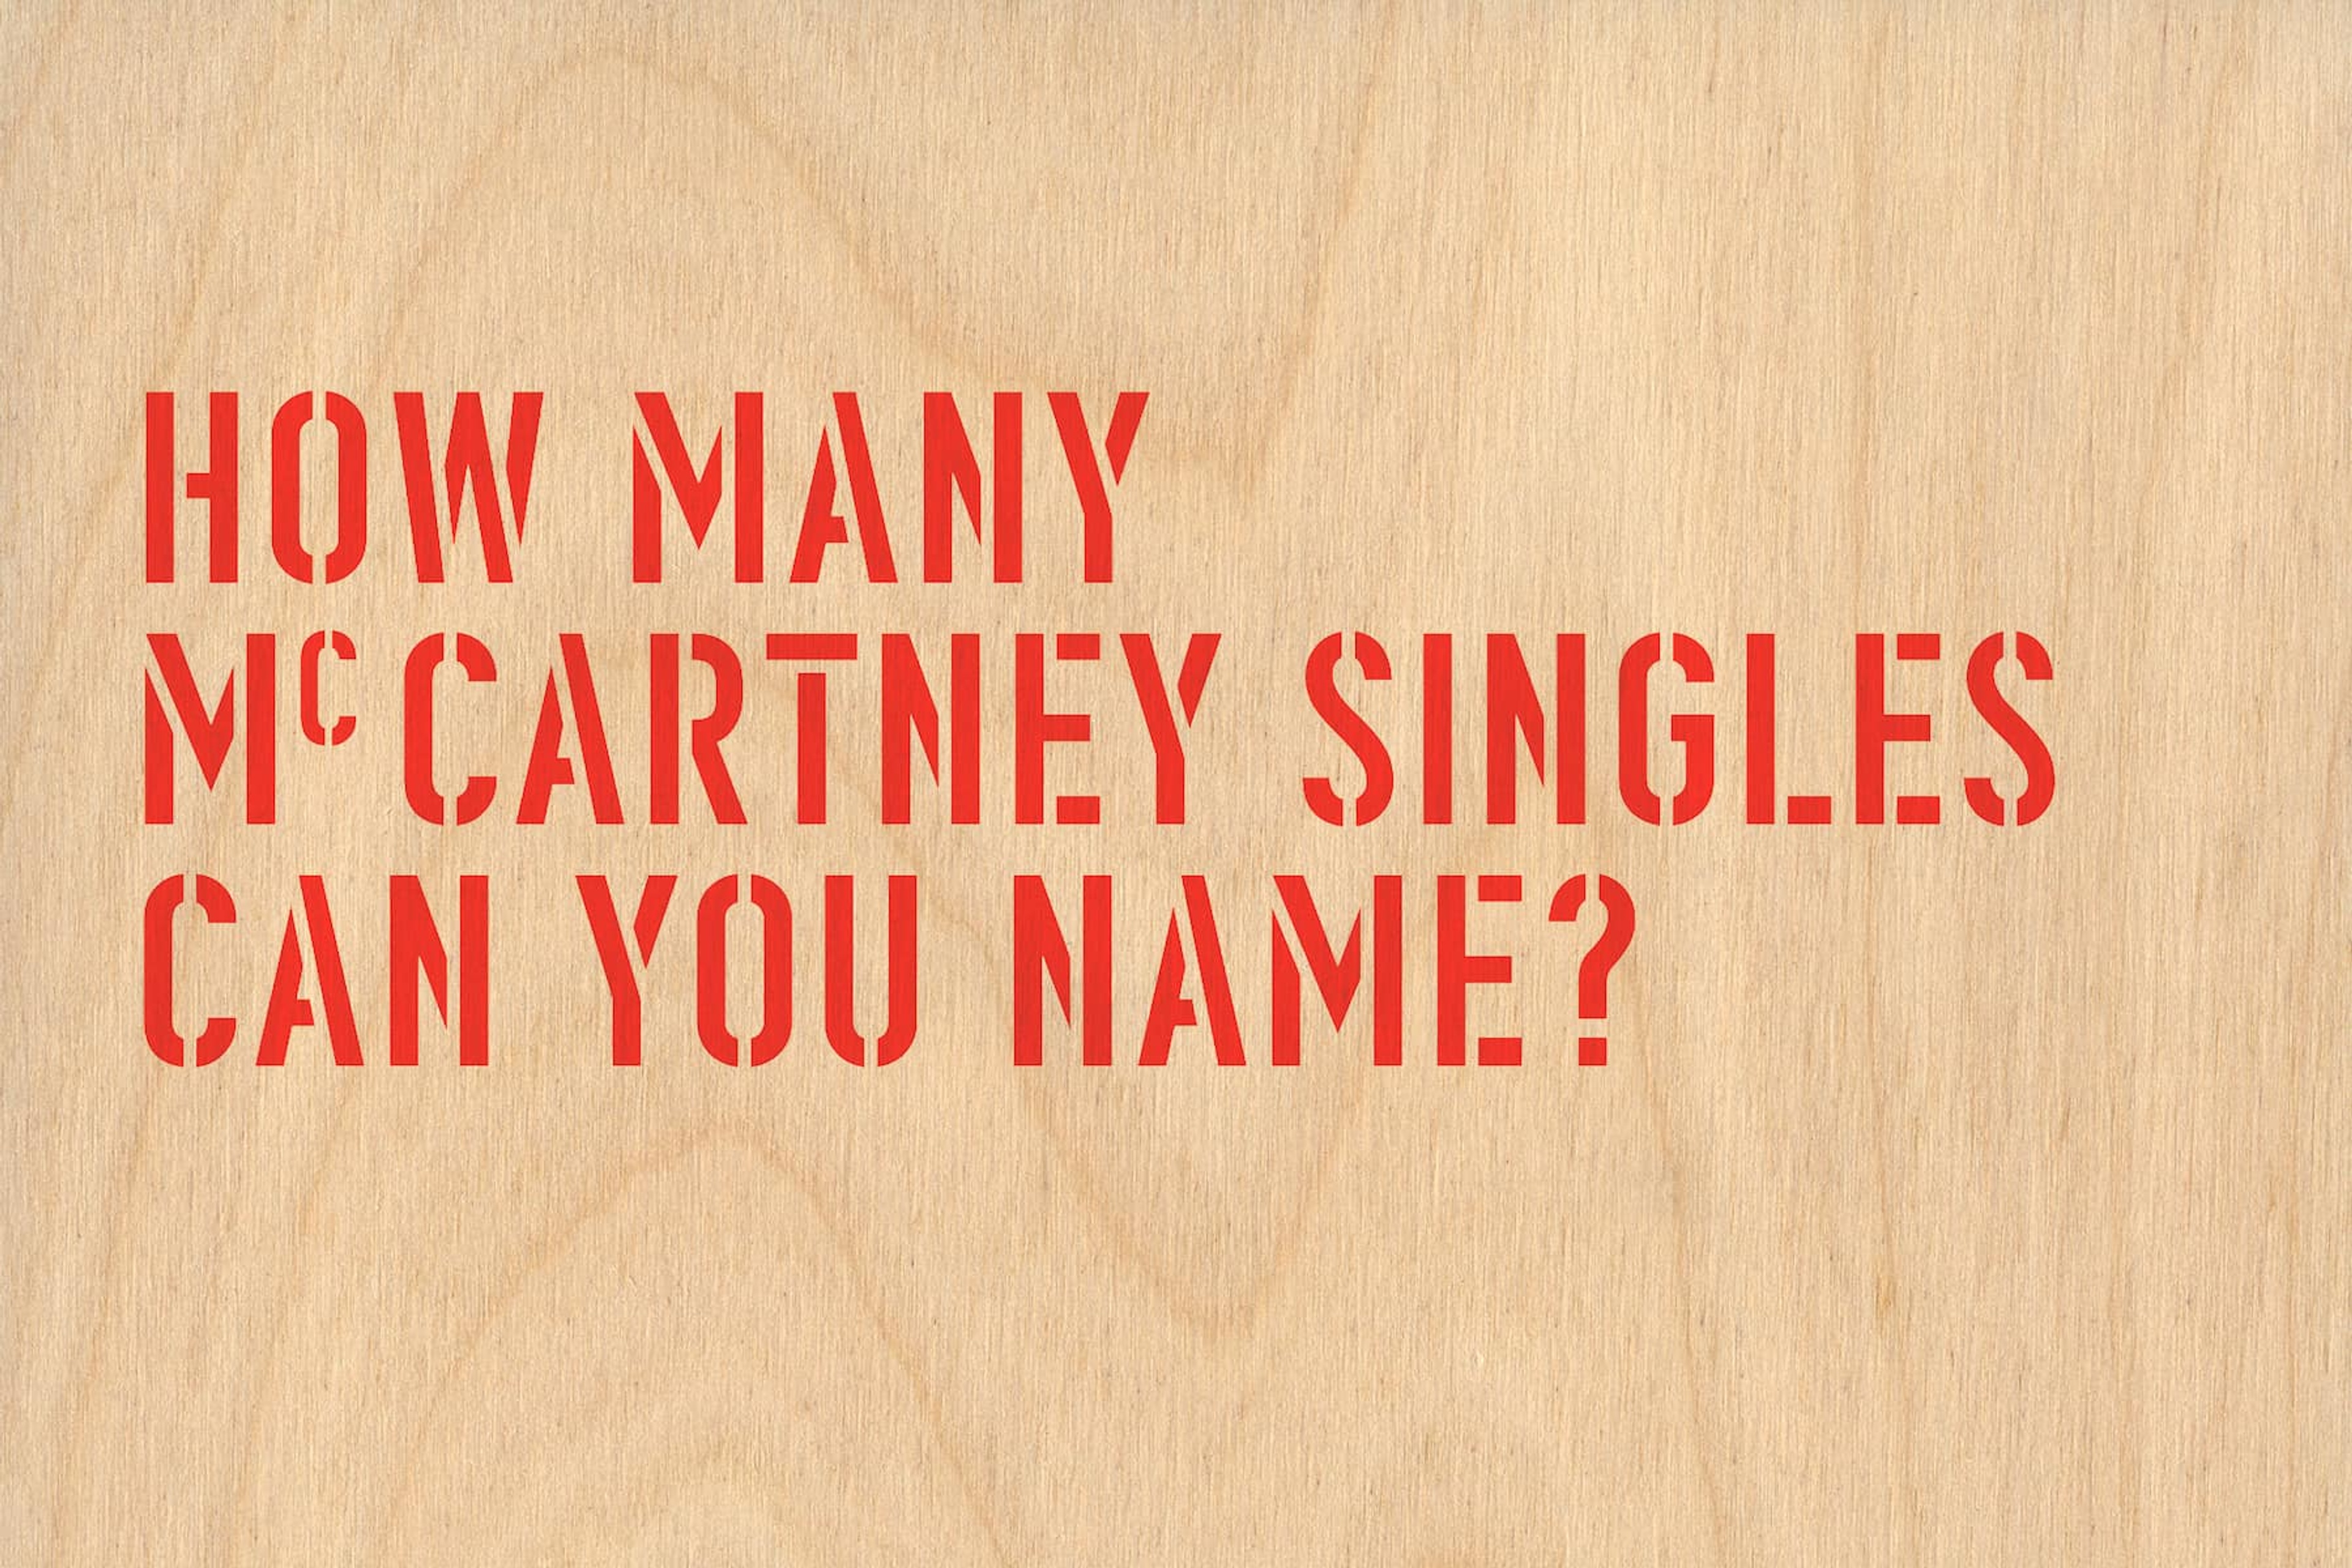 Graphic image saying 'How Many McCartney Singles can you name?'